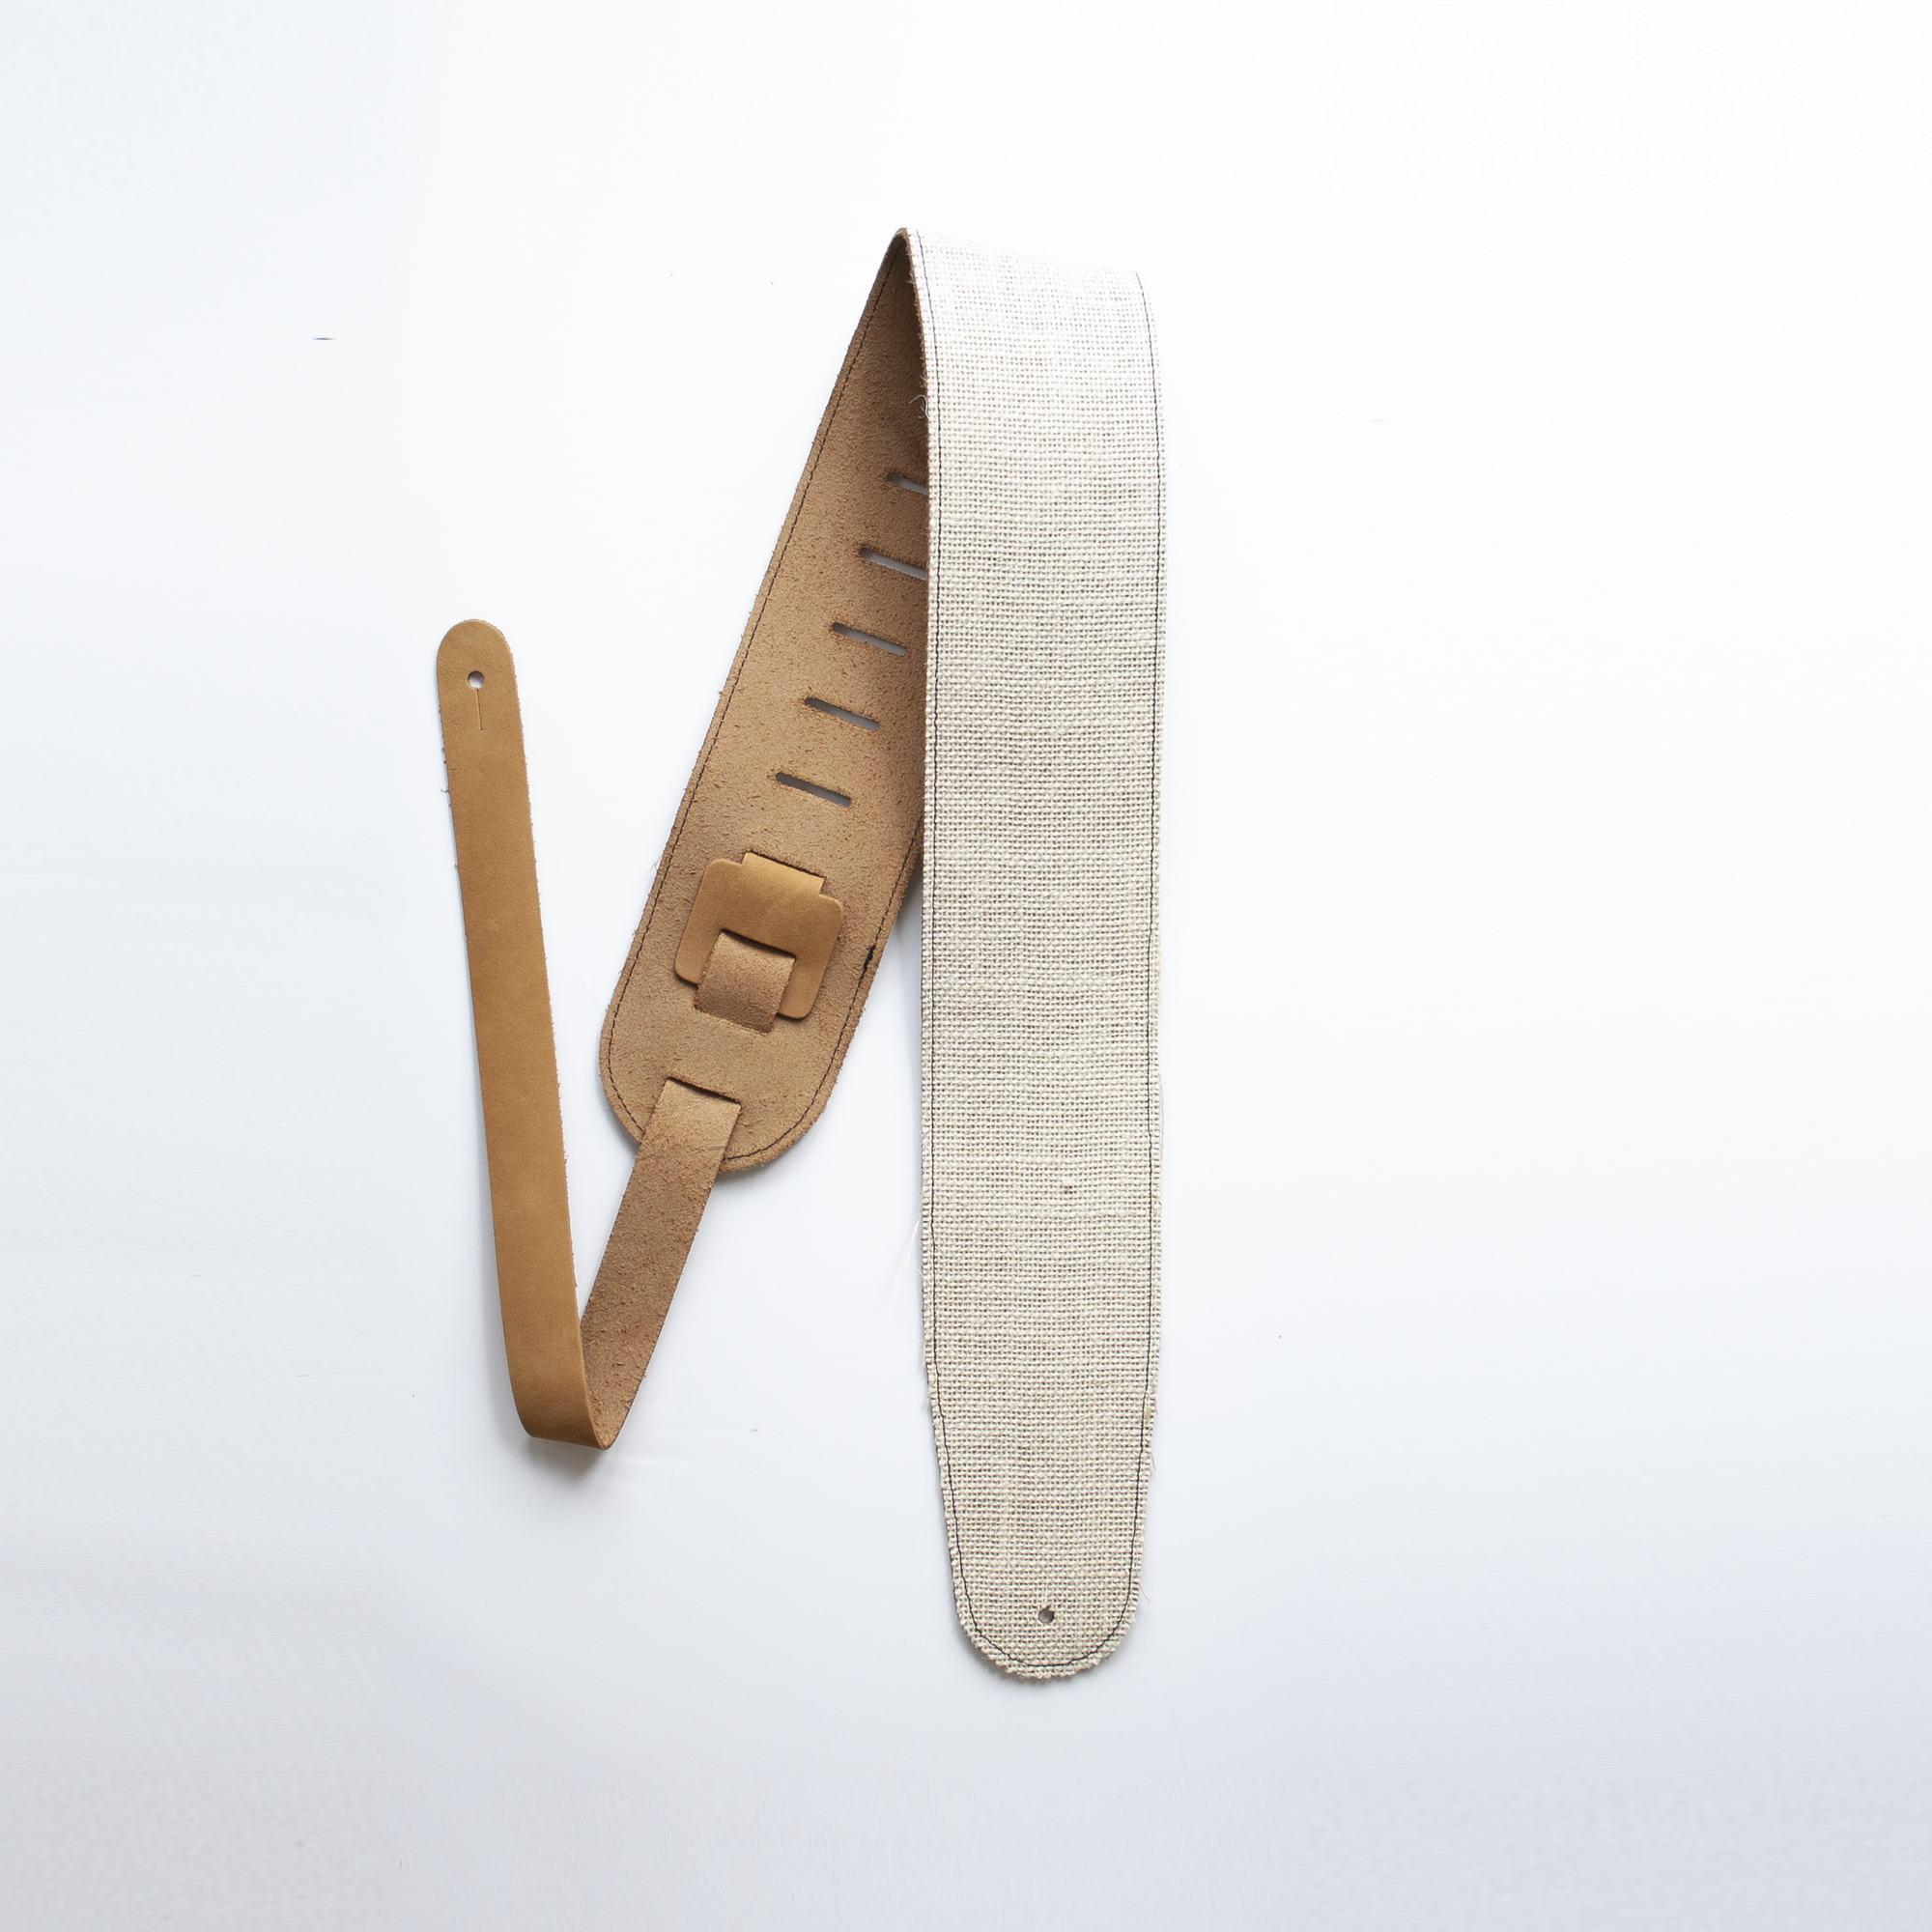 BURLAP LEATHER GUITAR STRAPS | TRADITIONAL STYLING